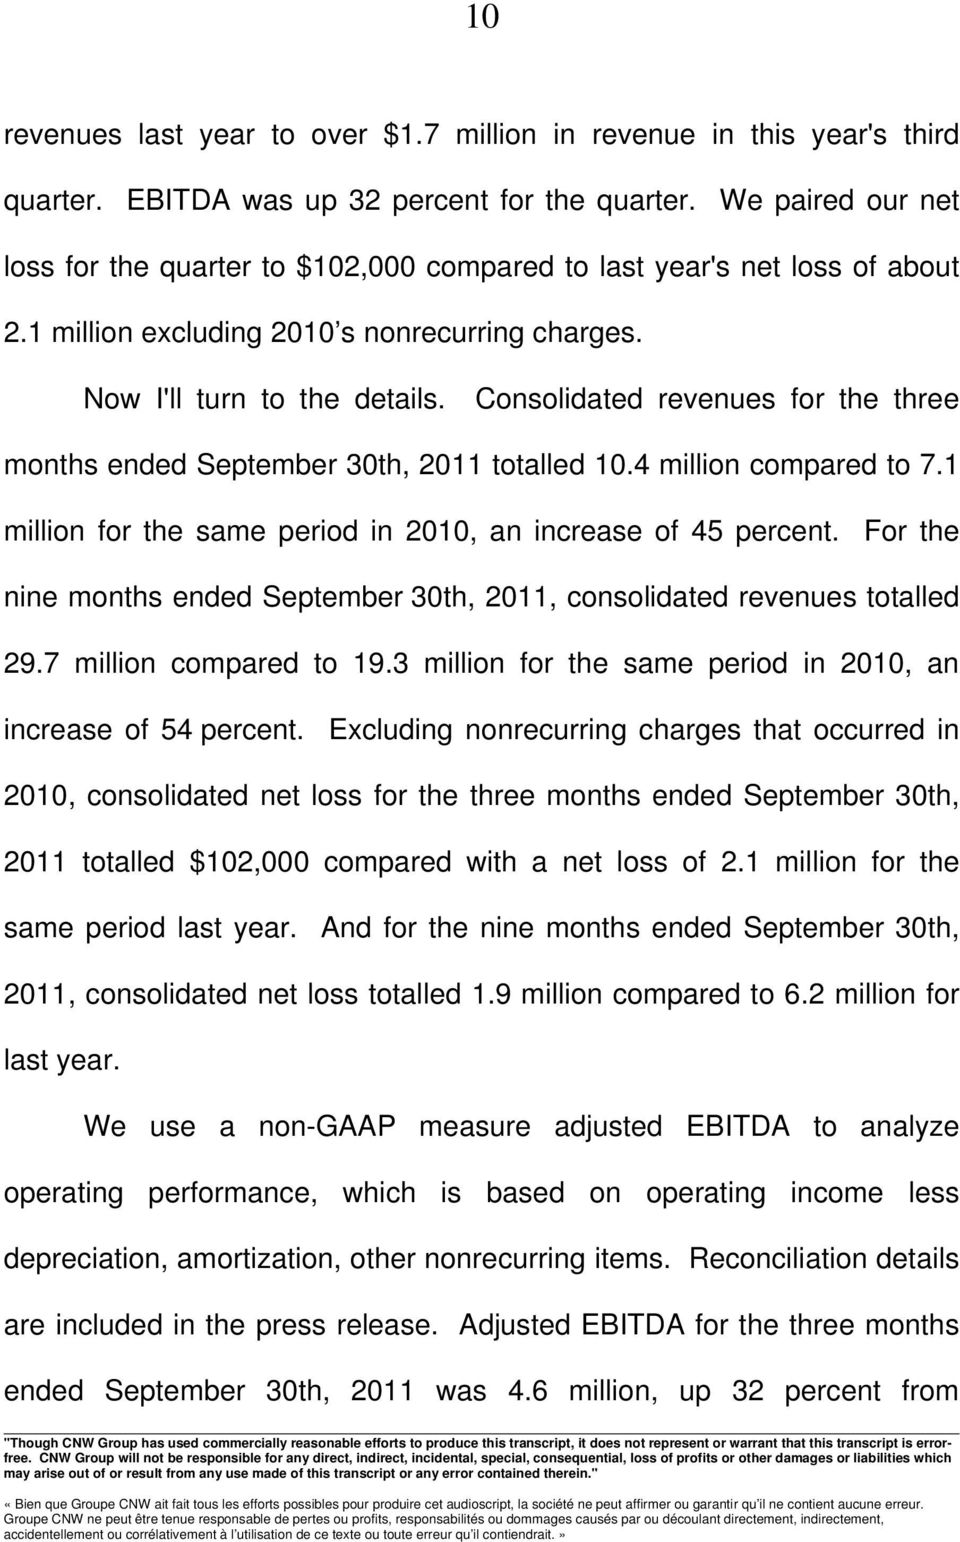 Consolidated revenues for the three months ended September 30th, 2011 totalled 10.4 million compared to 7.1 million for the same period in 2010, an increase of 45 percent.